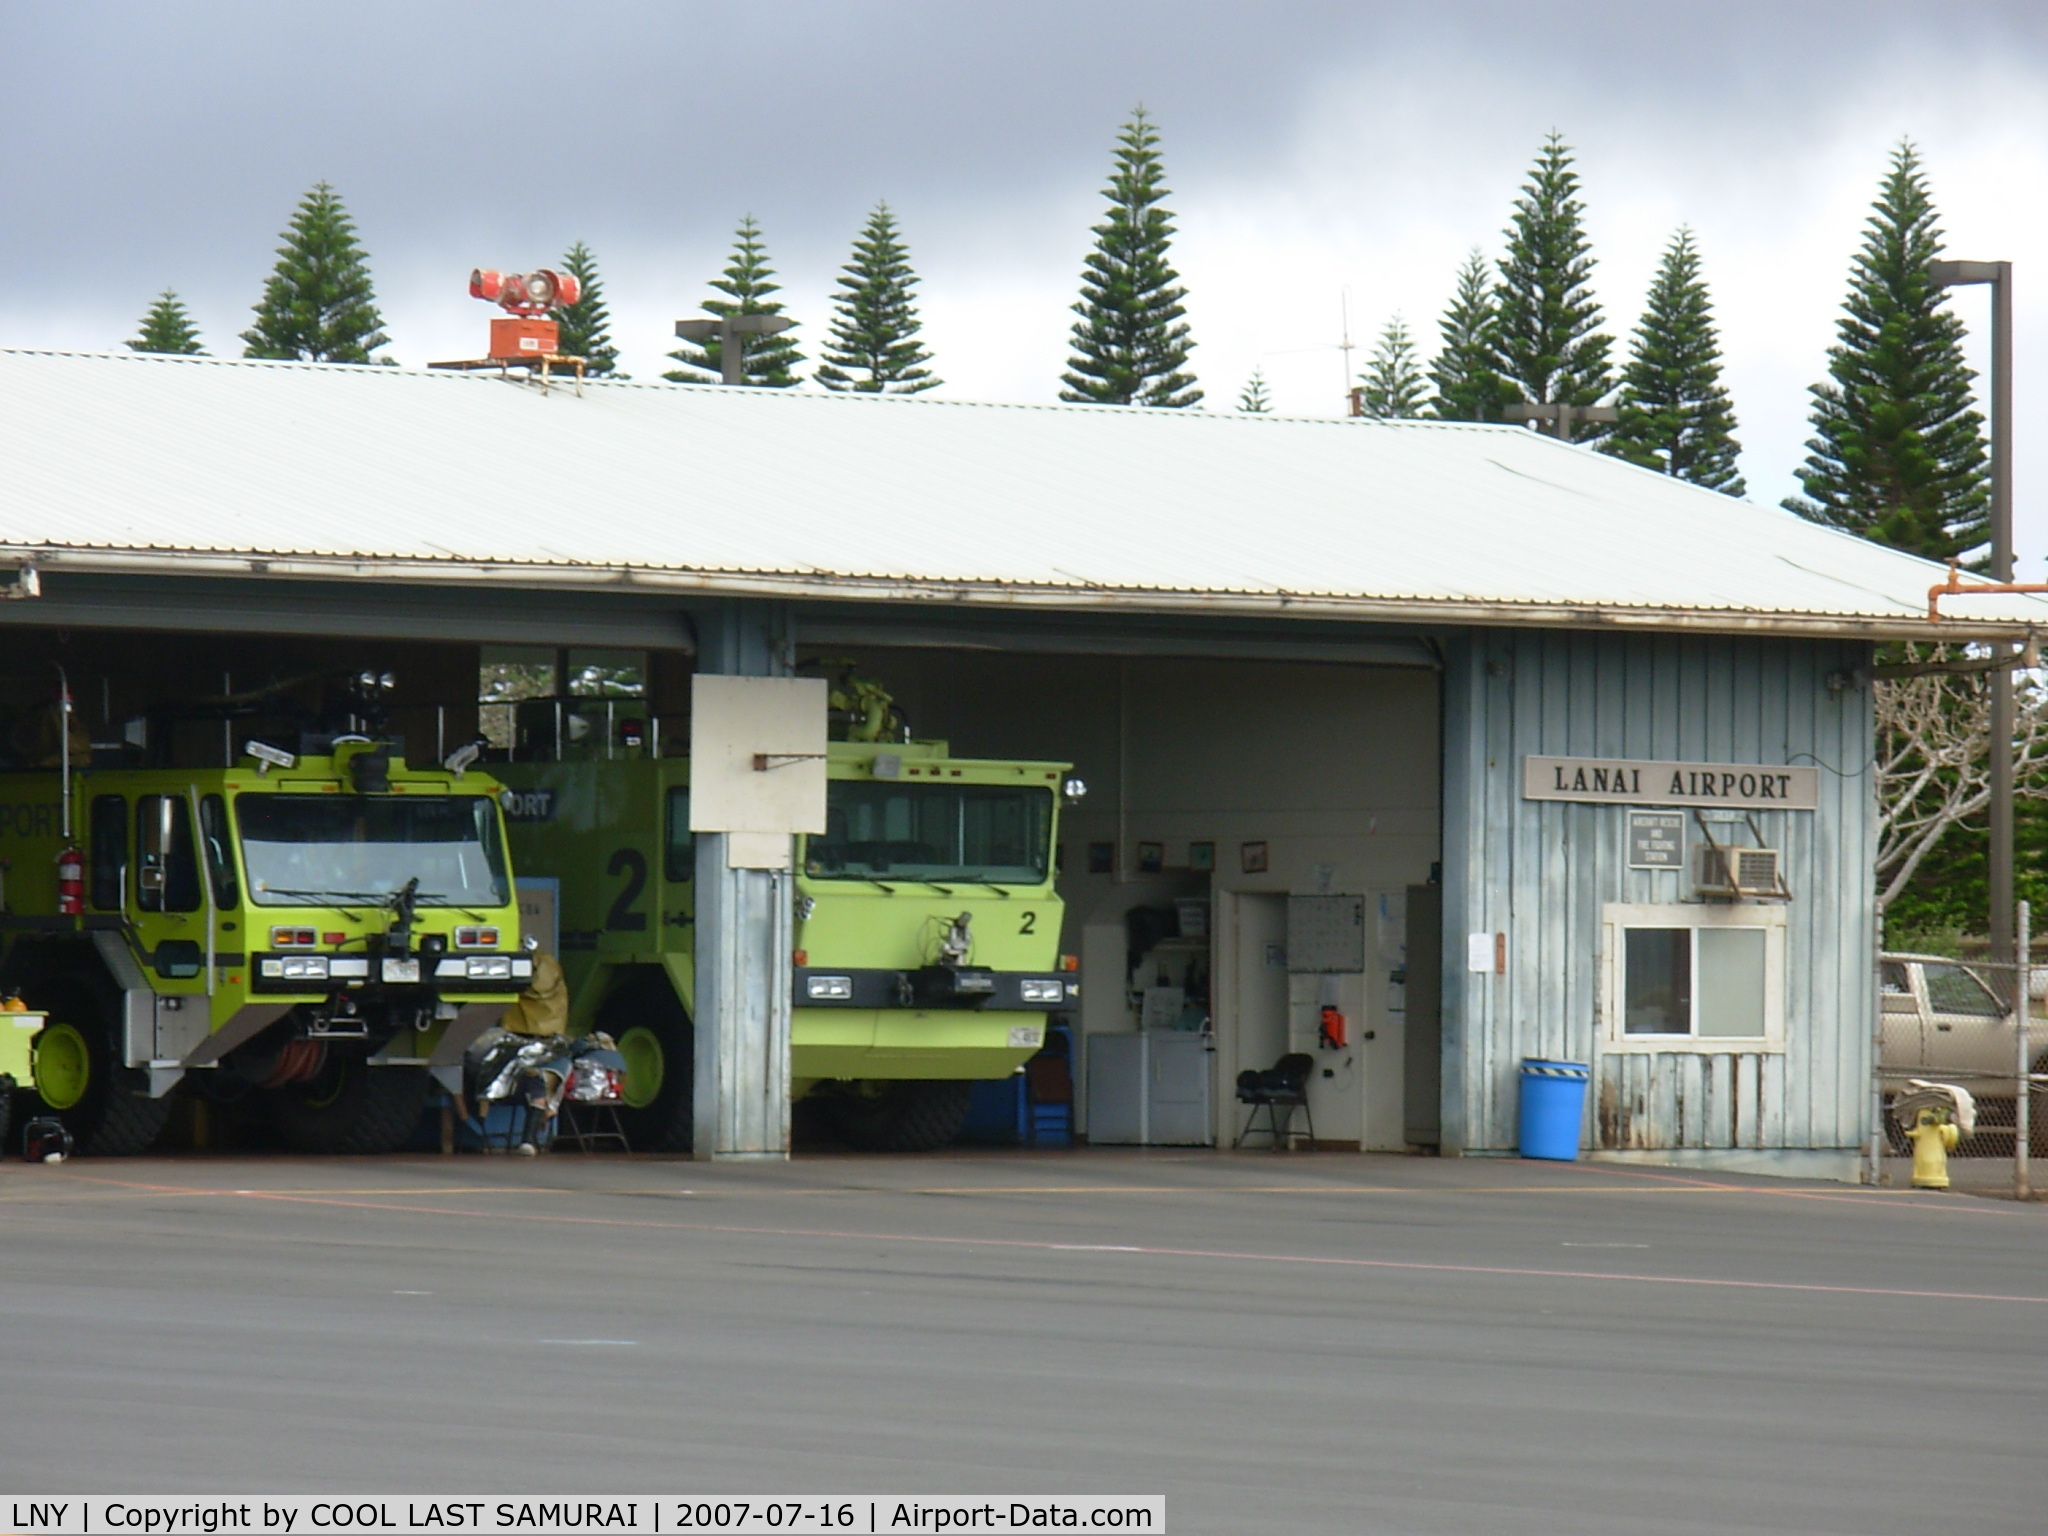 Lanai Airport (LNY) - A VIEW FROM TRANSIENT PARKING OF LNY